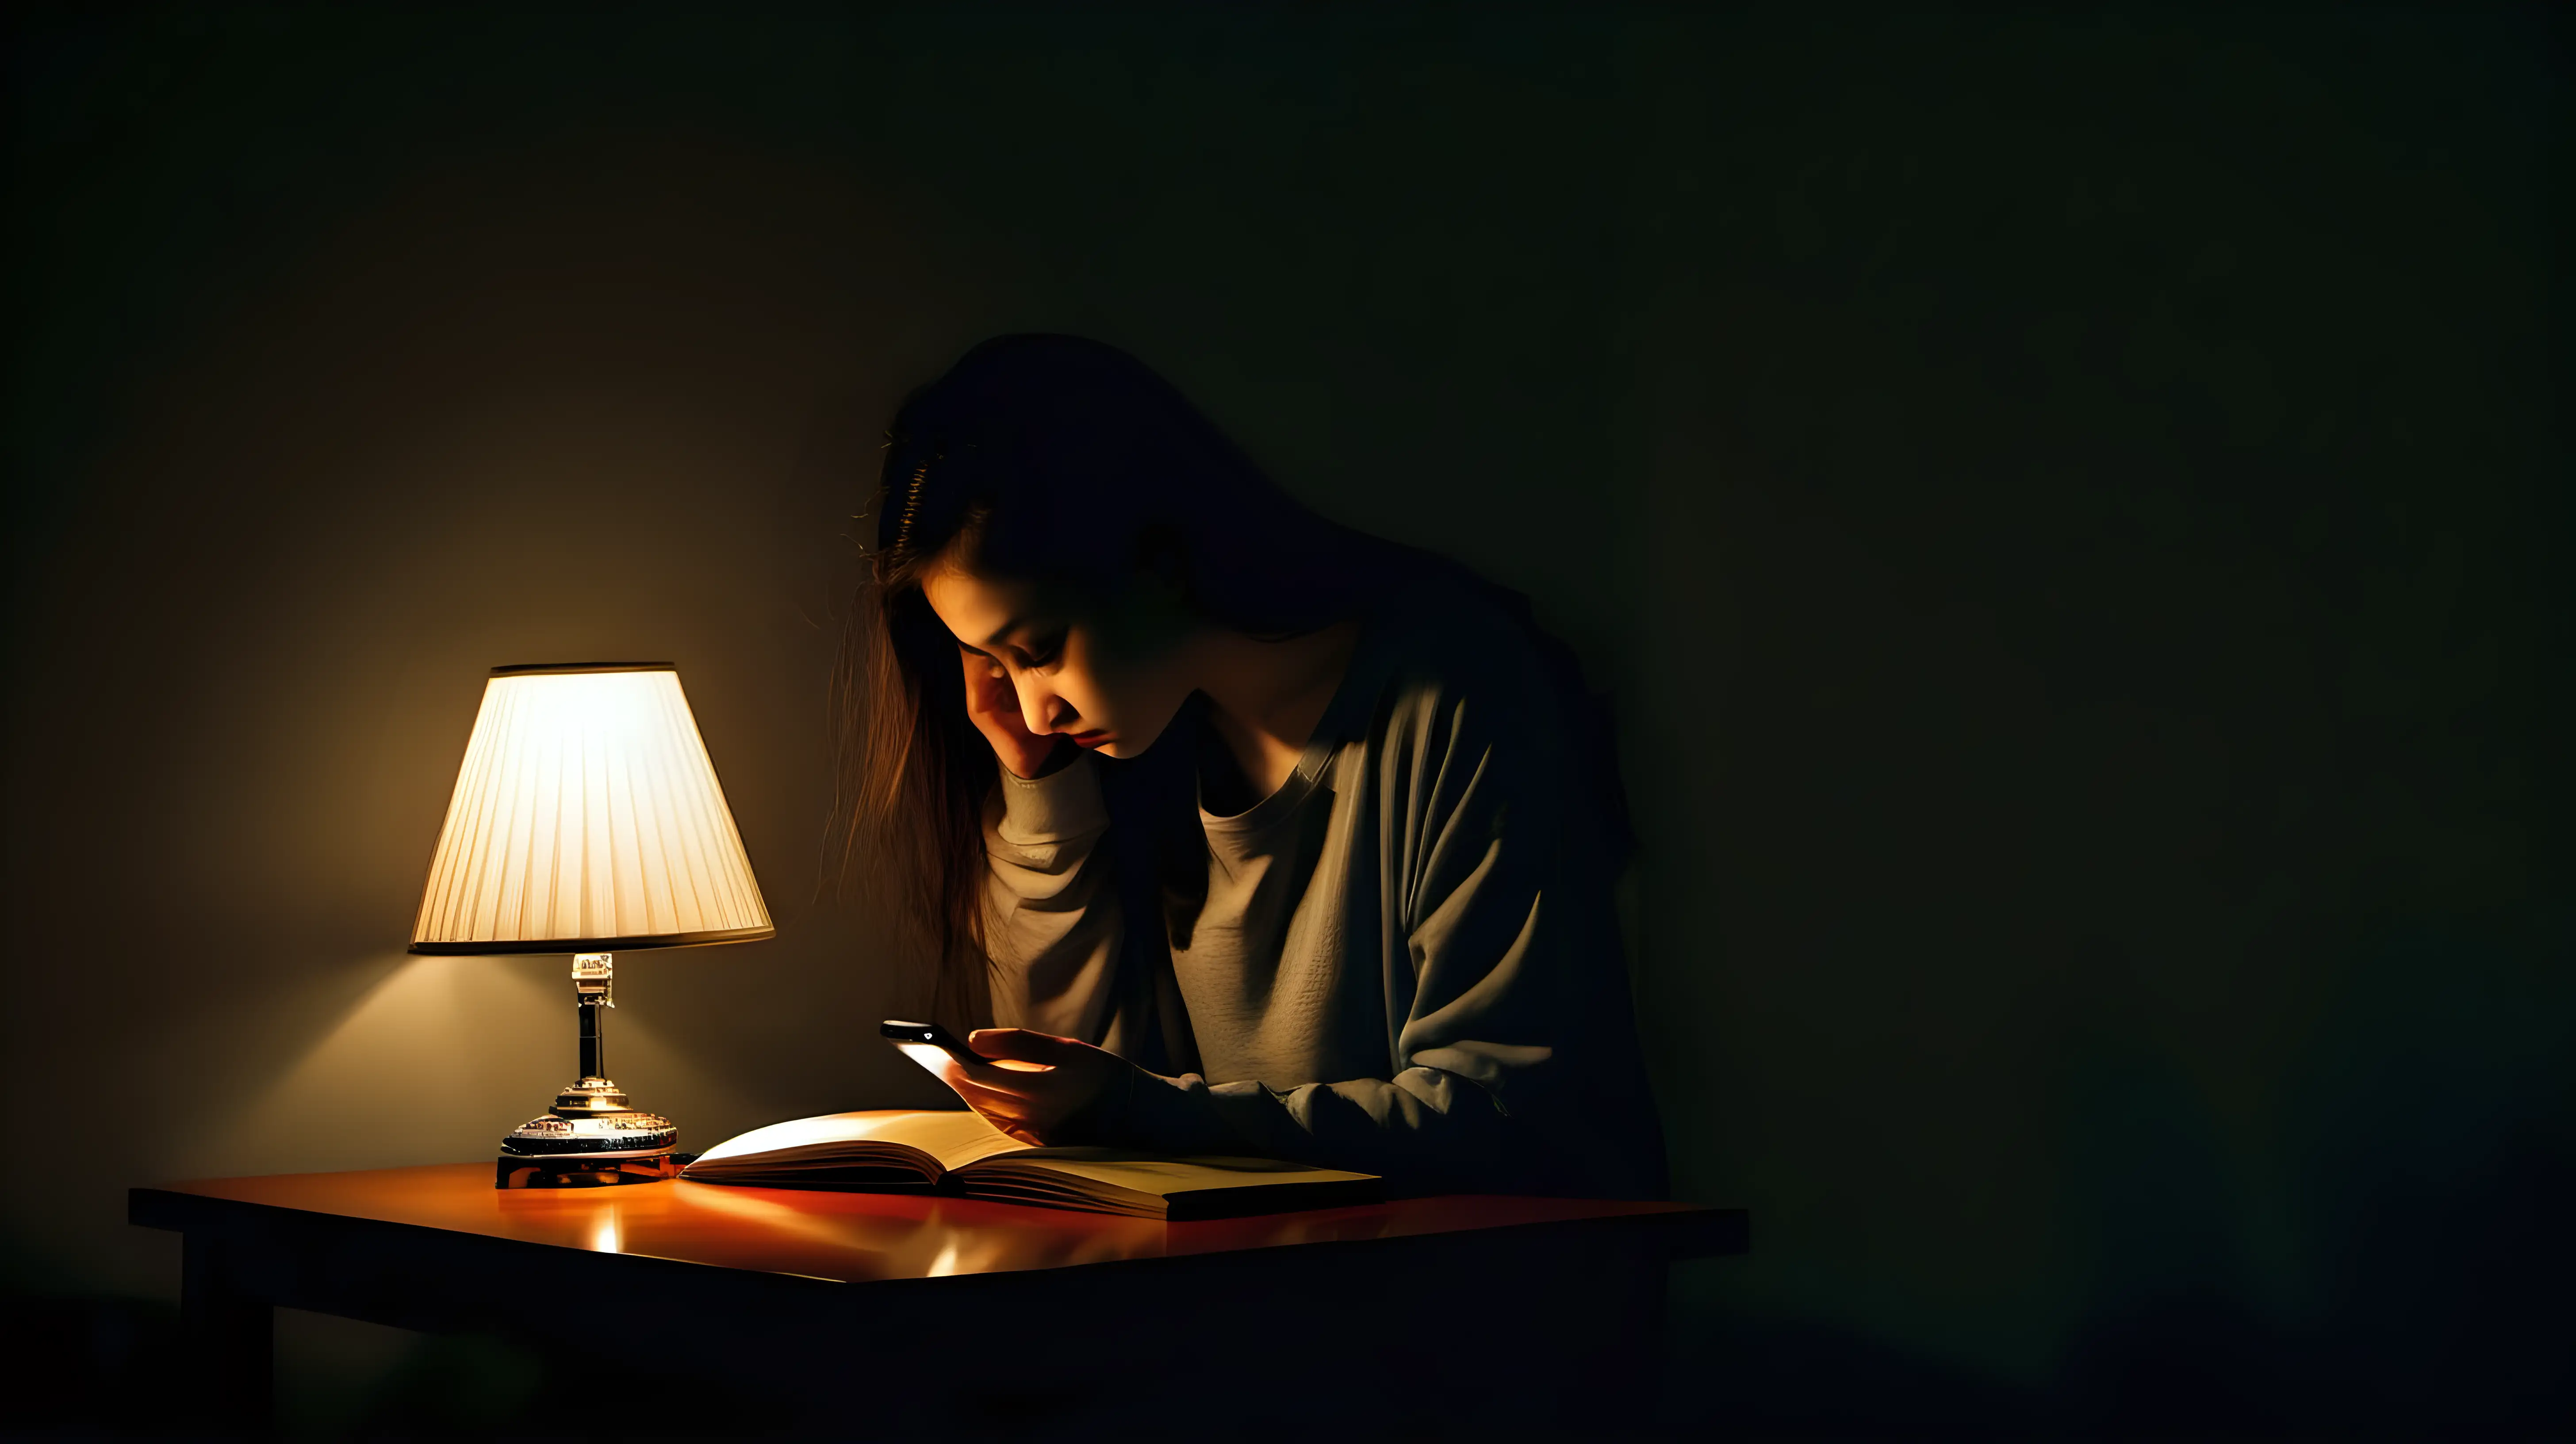 real girl sadness loneliness big room soft light waiting darkness light lamp book smartphone chatting